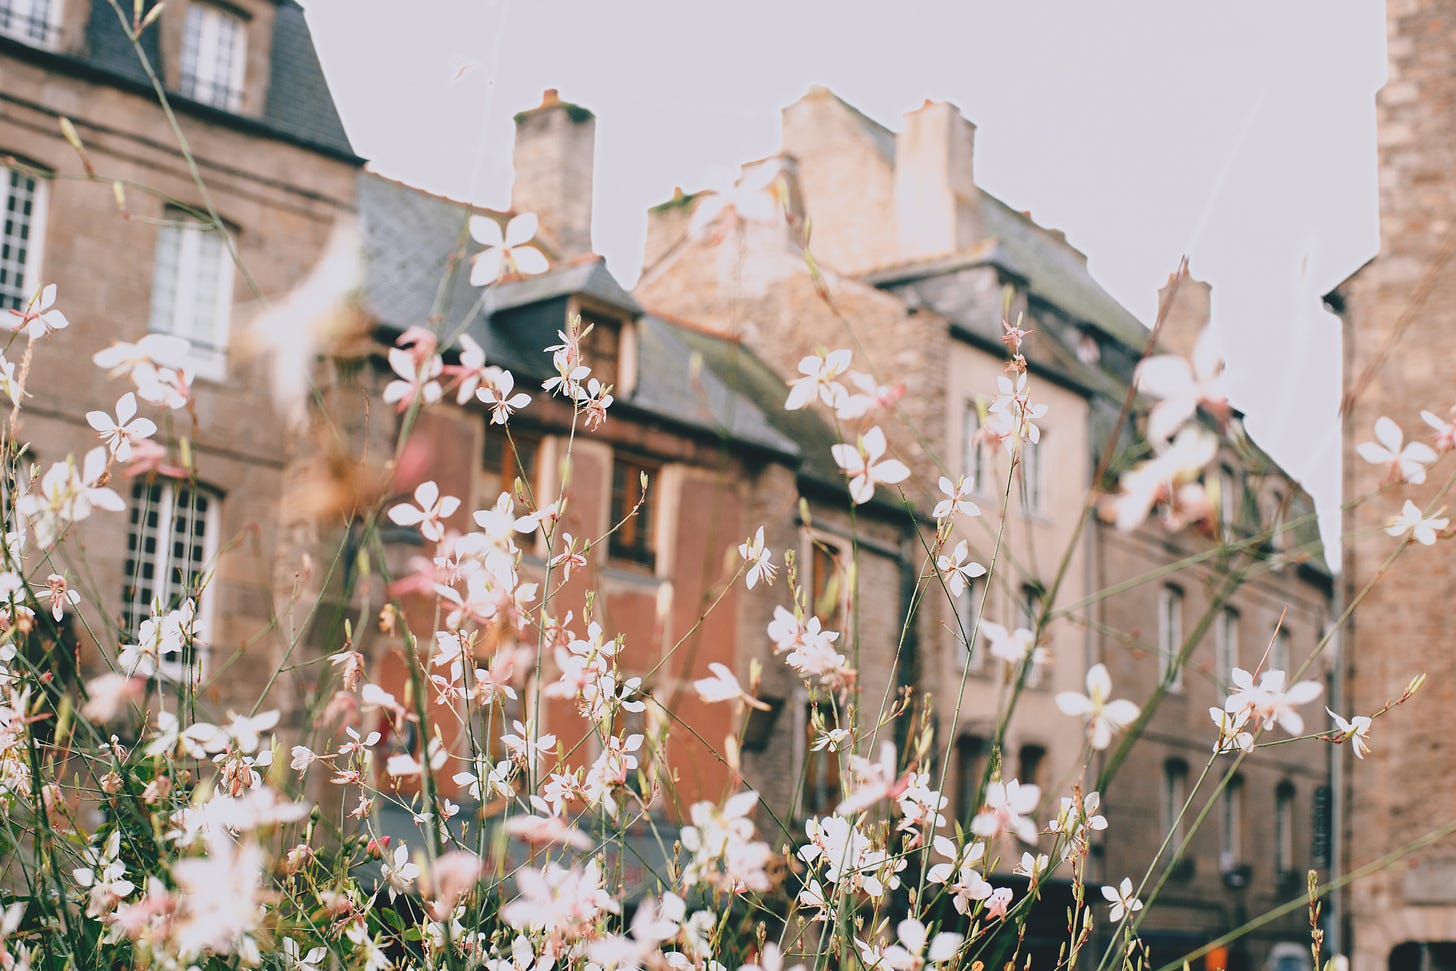 A photo of a few houses in a neighborhood, taken from the ground; a plant with small white flowers partially obscures the view; the houses are a bit blurry with the flowers in focus